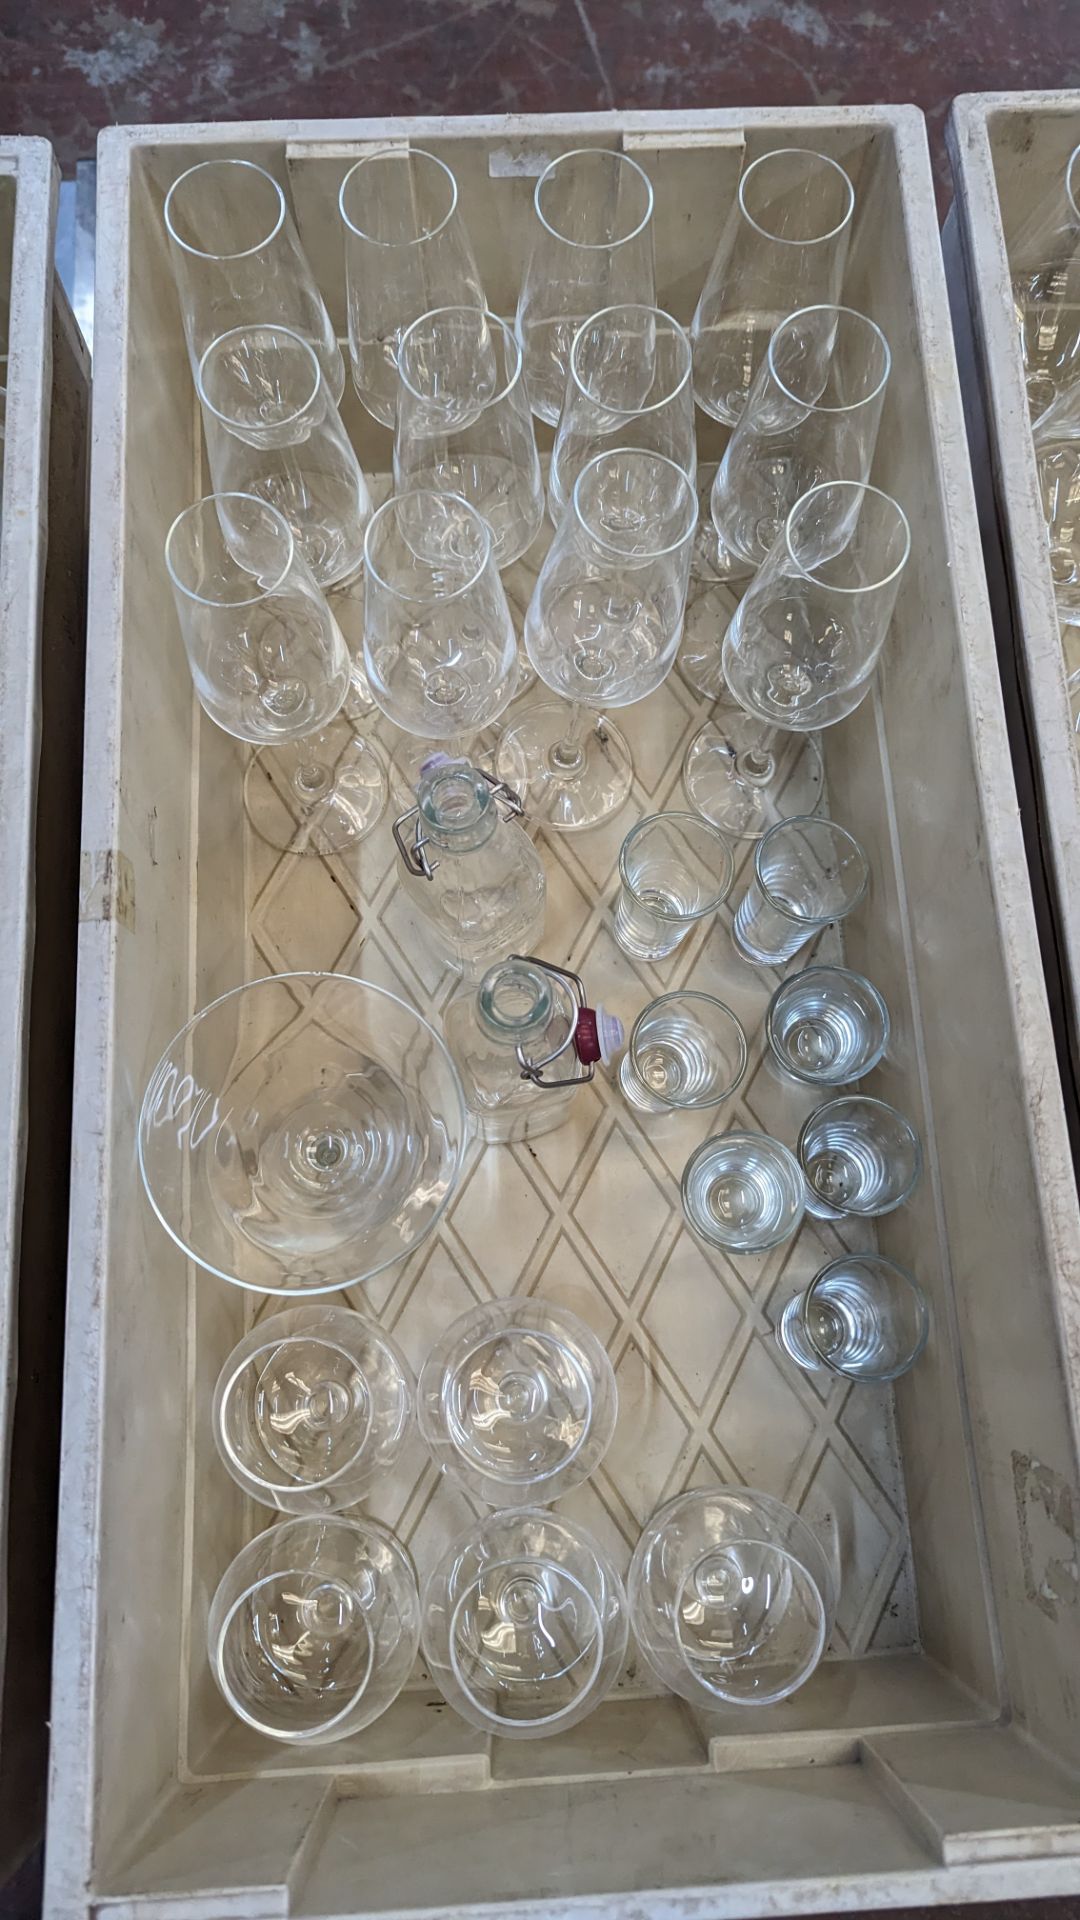 The contents of 2 crates of glassware including jugs, tumblers, dessert glasses, brandy glasses and - Image 6 of 6